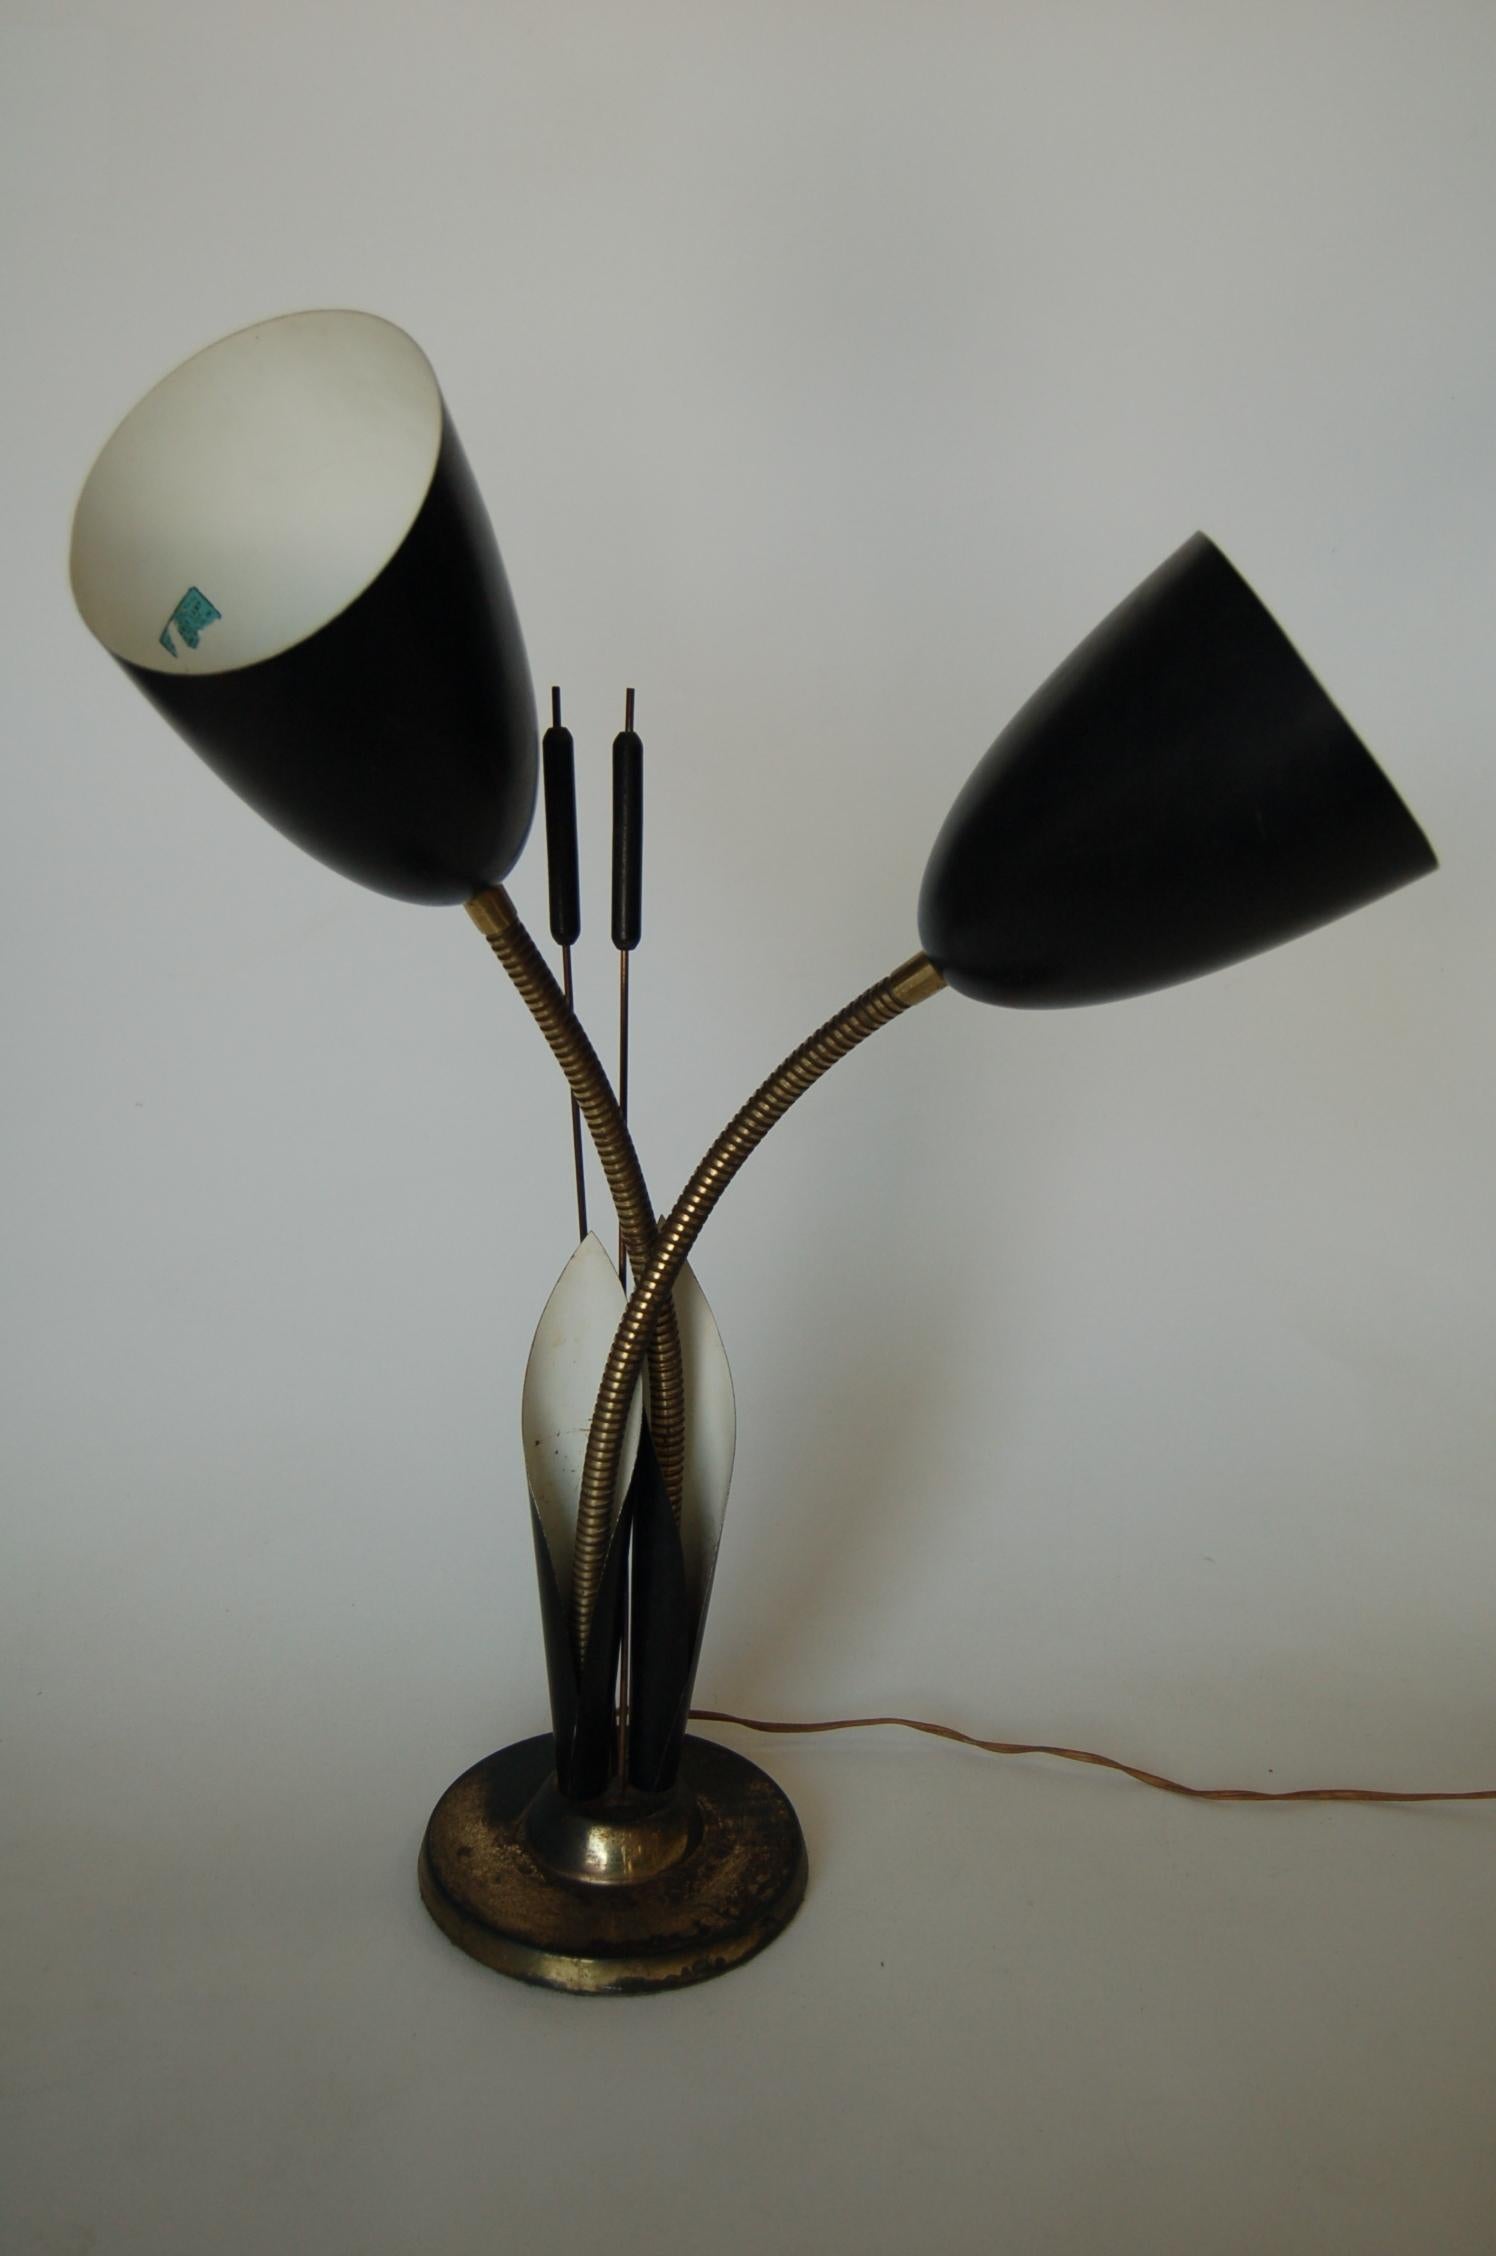 Black metal and brass midcentury double gooseneck adjustable flex arm calla lily cone desk table lamp on brass base. 3 way light switch.

Measures: 7